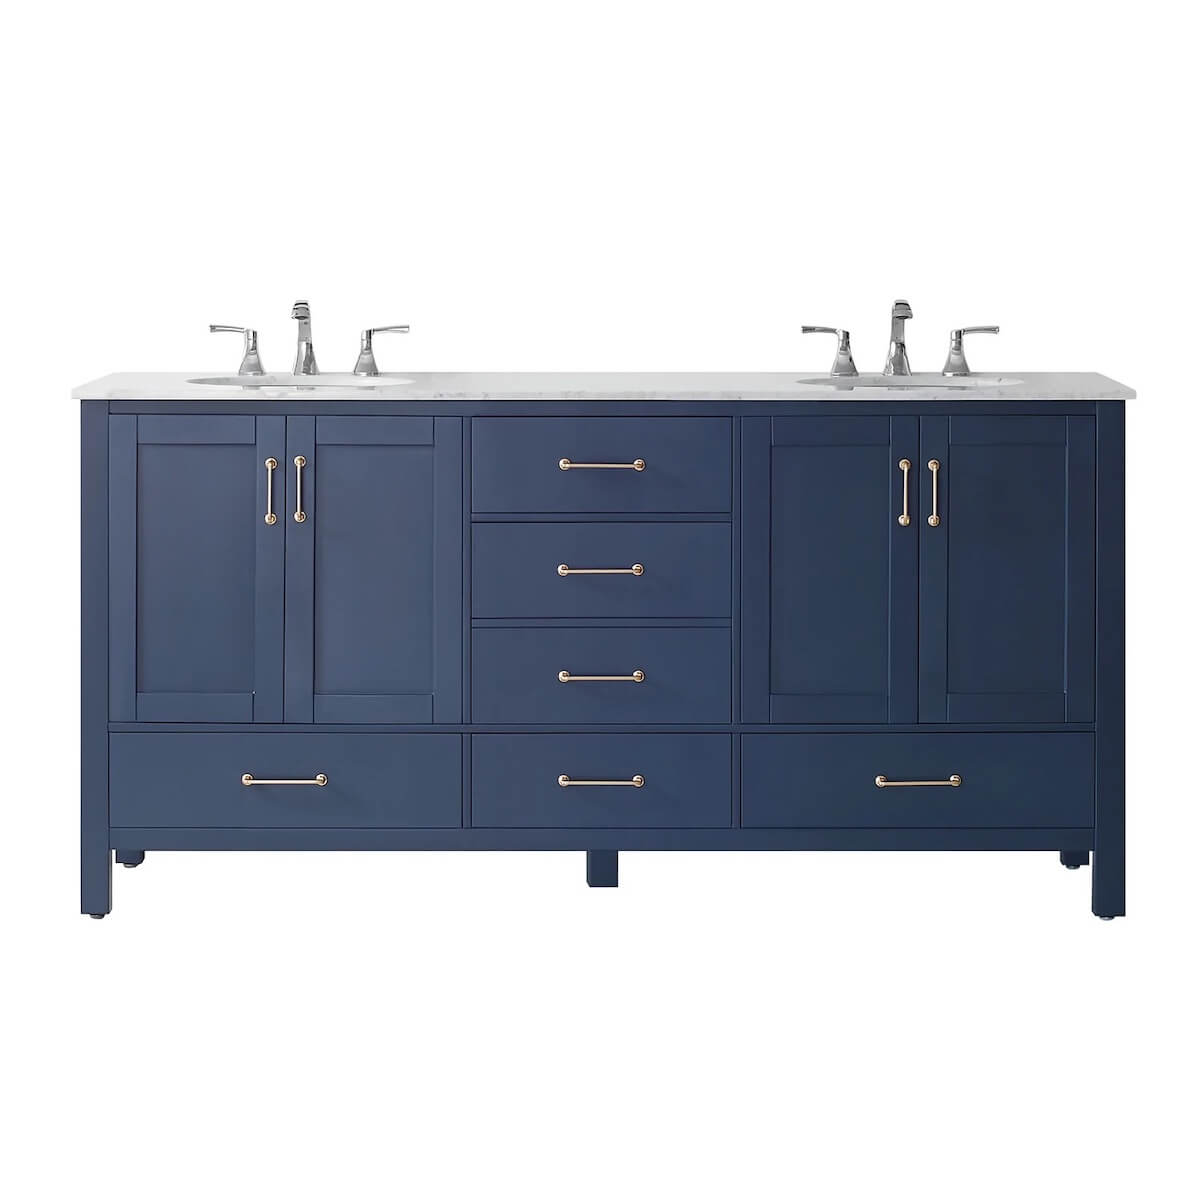 Vinnova 72” Gela Royal Blue Freestanding Double Vanity with Carrara White Marble Countertop Without Mirror 723072-RB-CA-NM